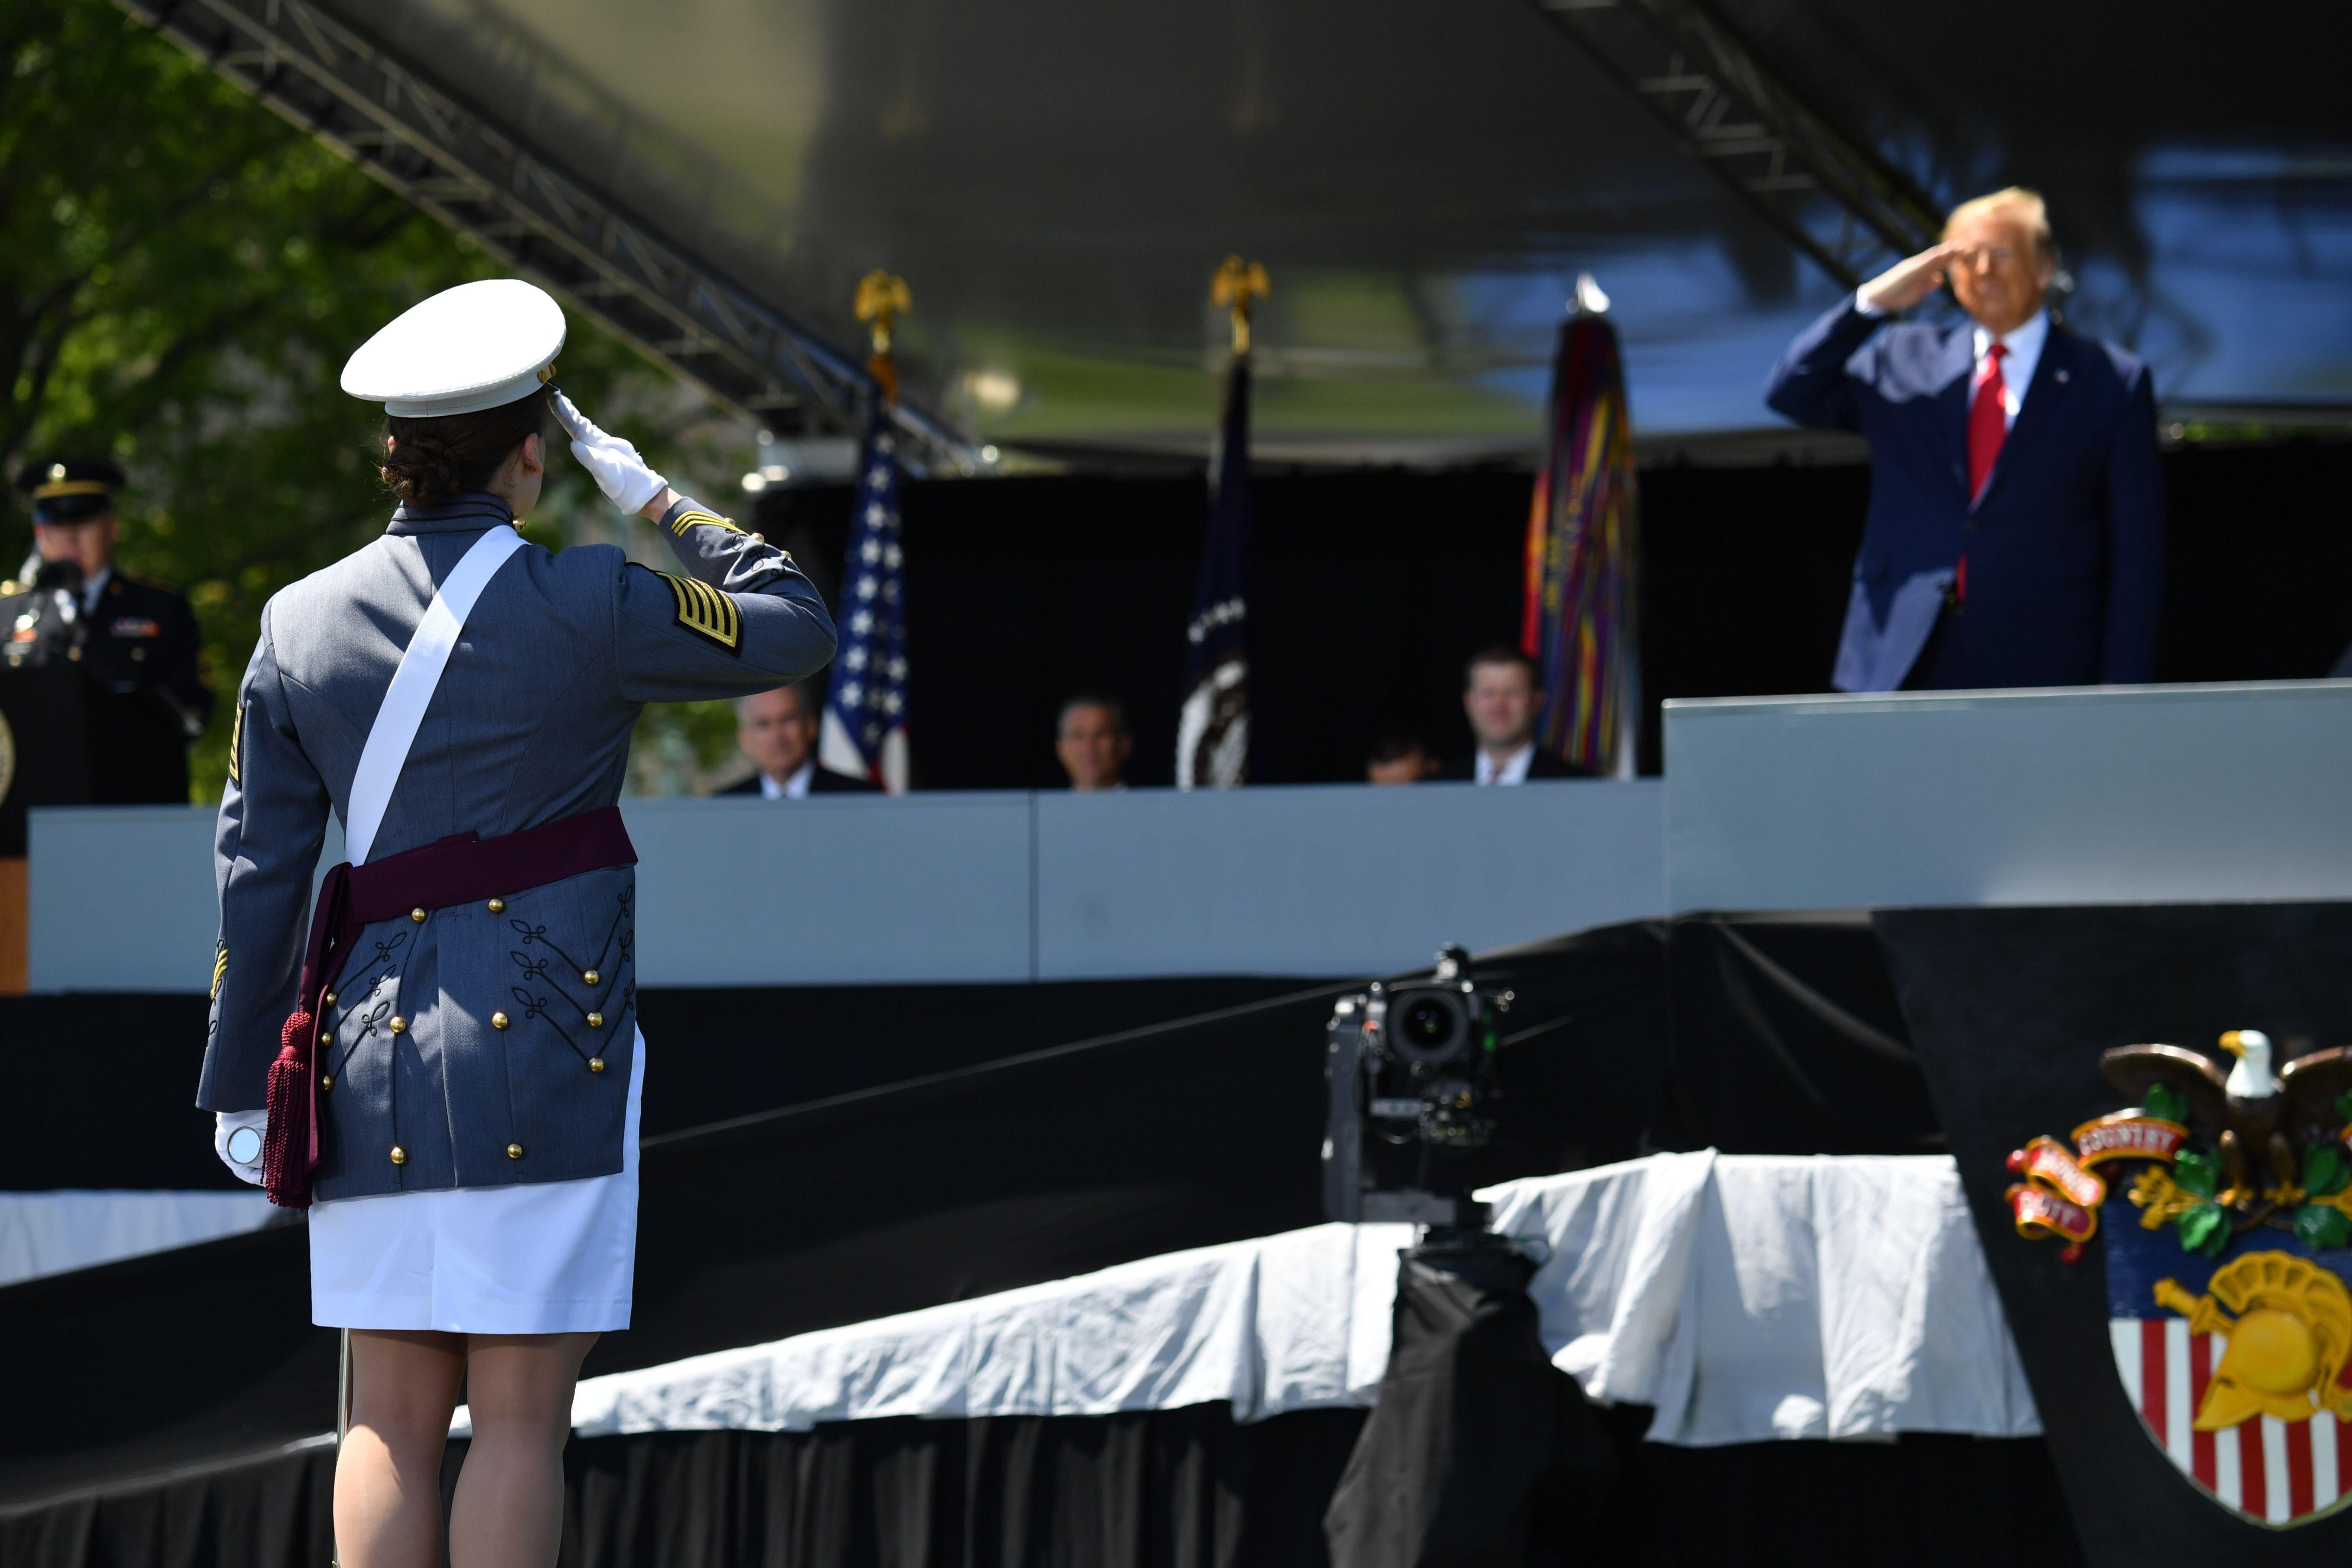 A female cadet with her back to the camera salutes Trump, who is standing onstage.